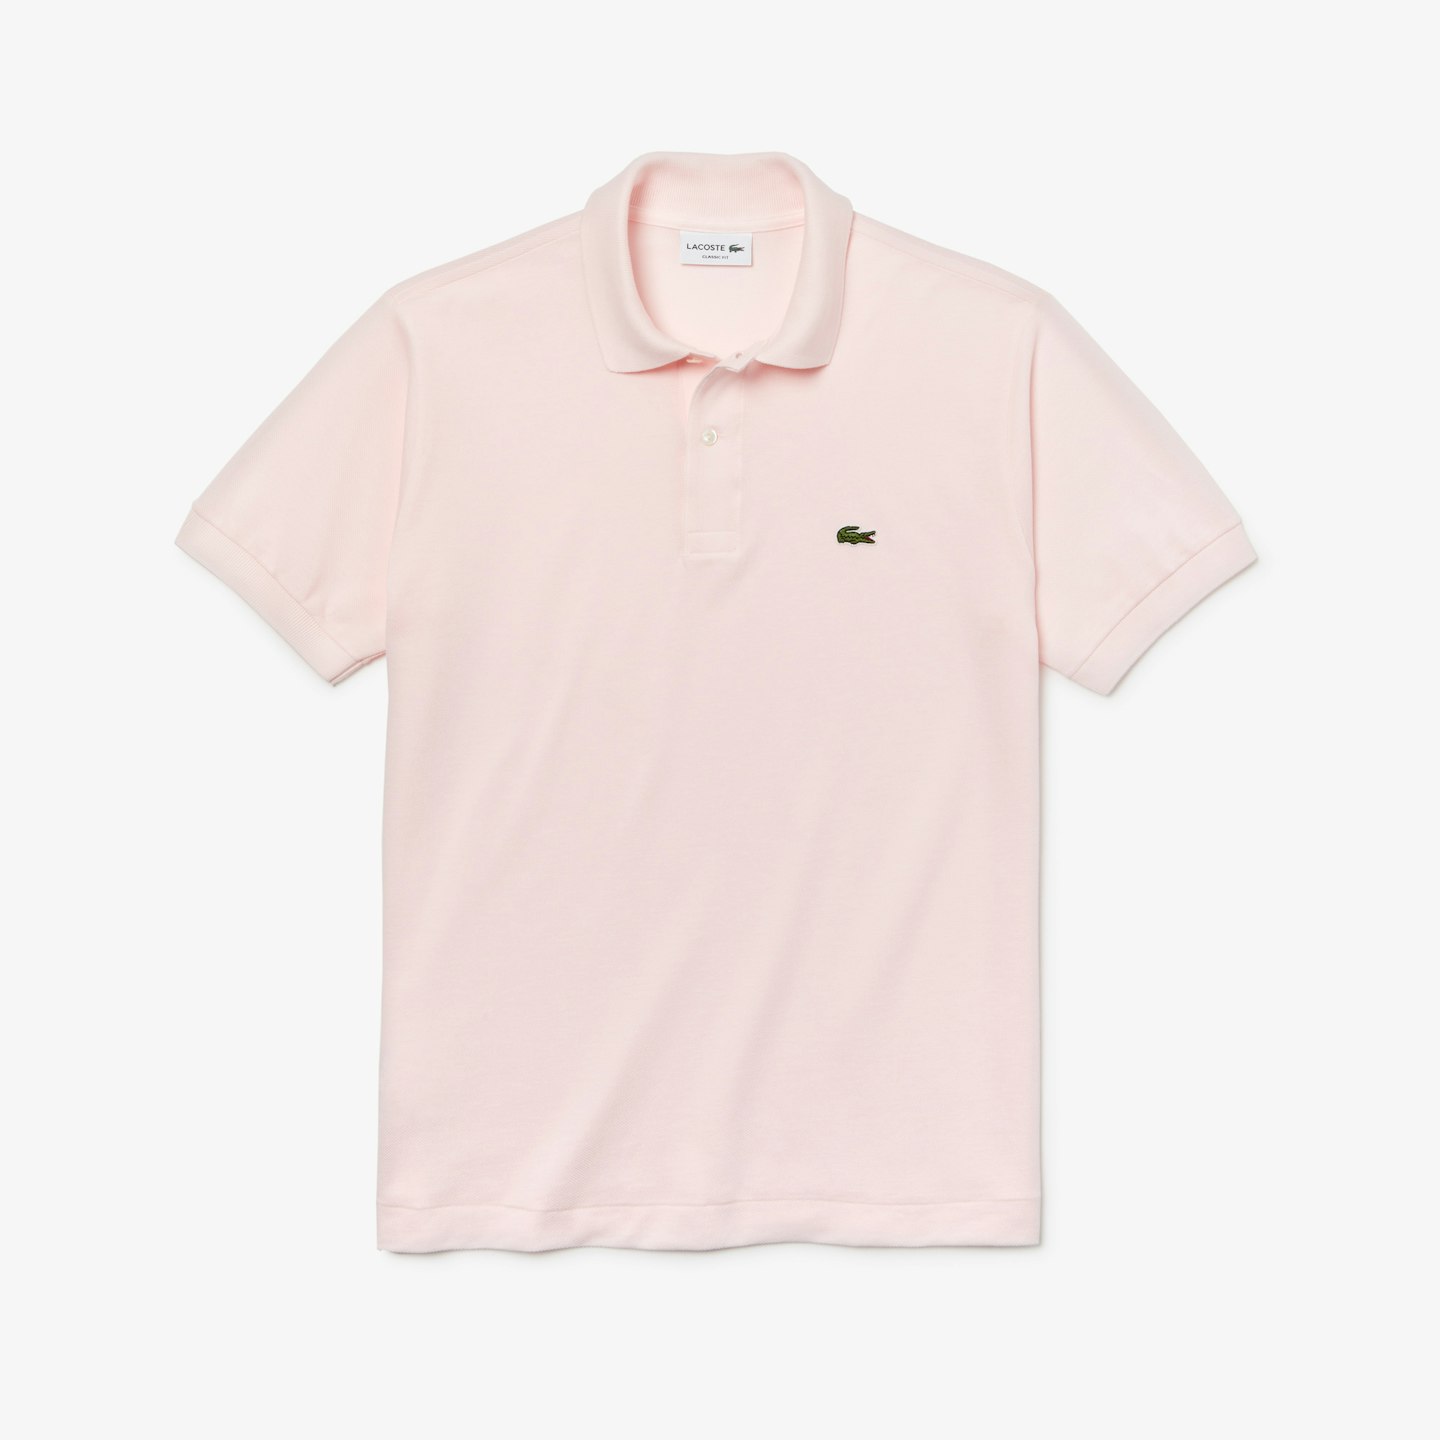 The Best Varsity Pieces - Lacoste Polo